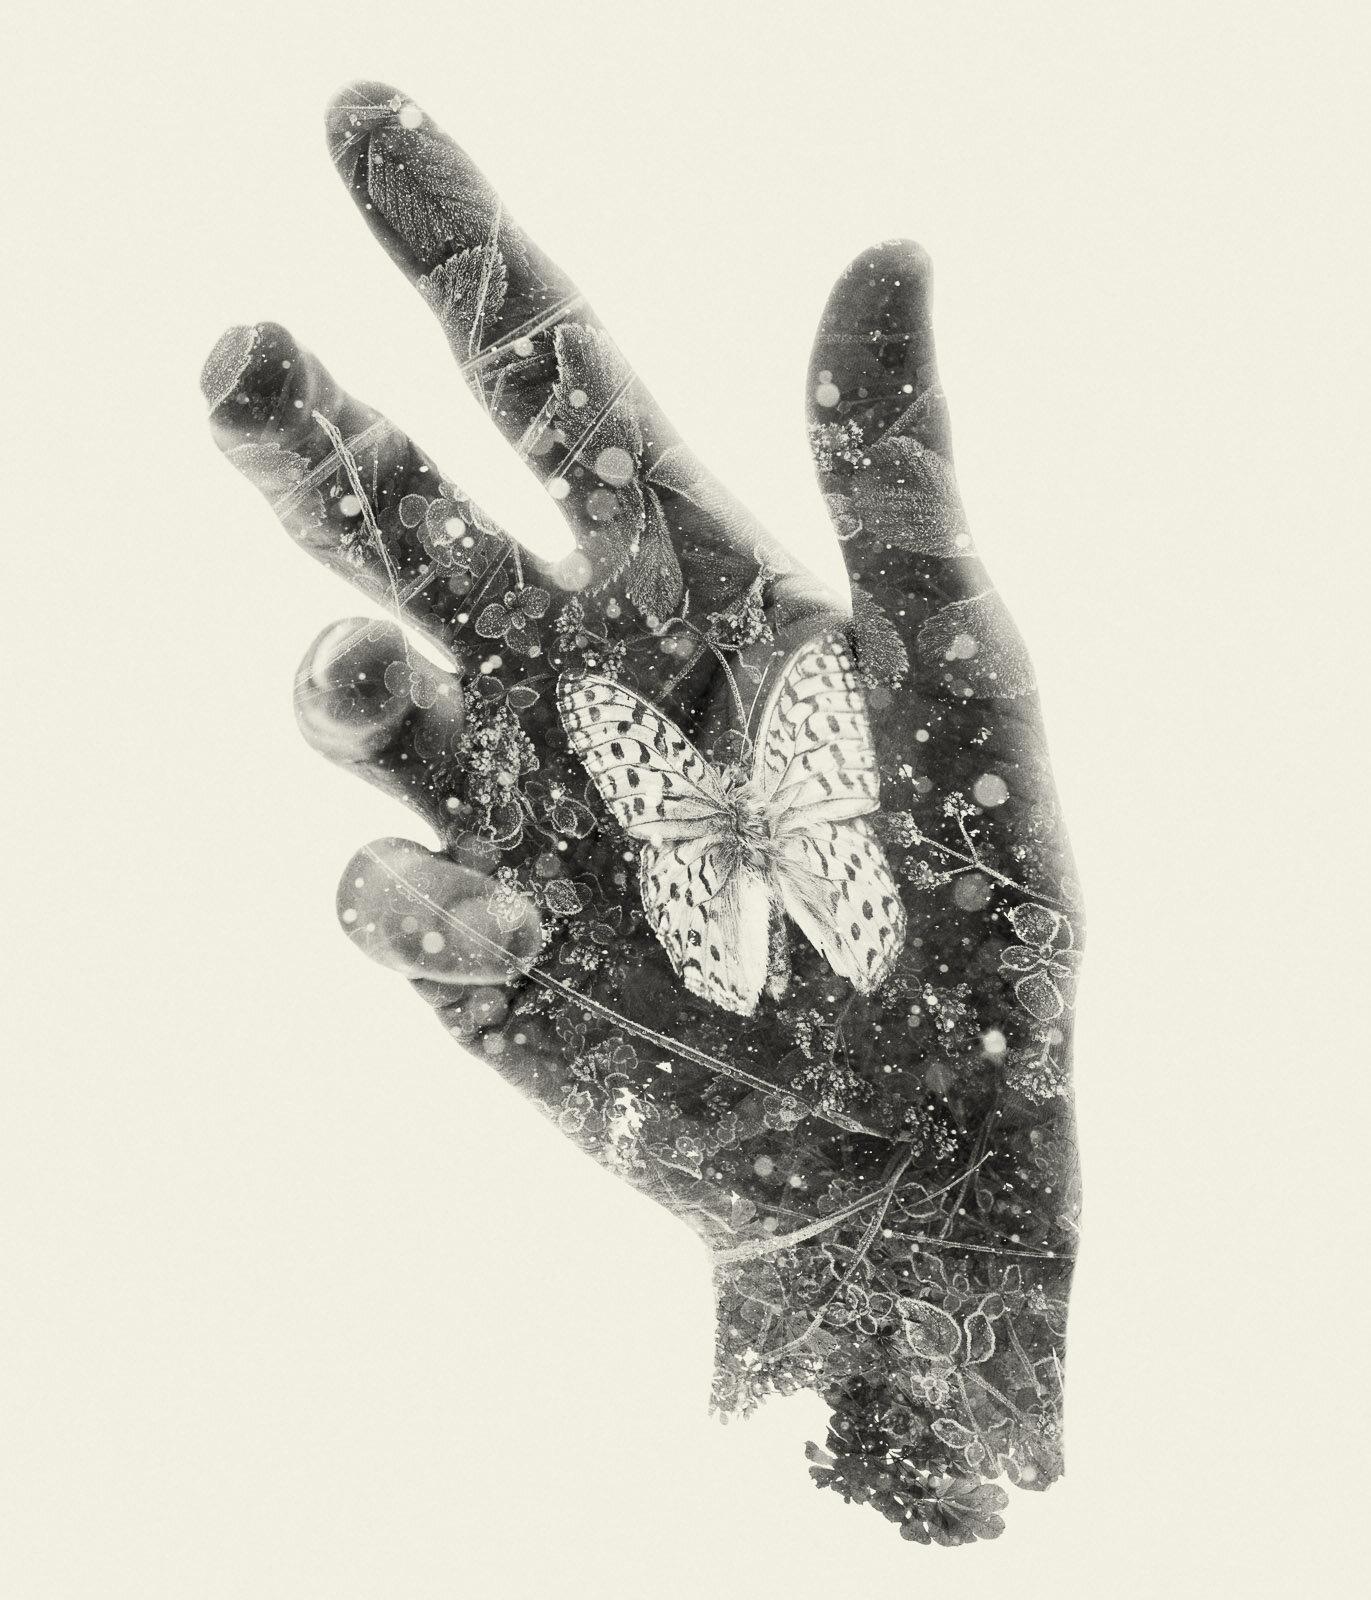 Resting Butterfly - black and white hand and nature multi exposure photograph